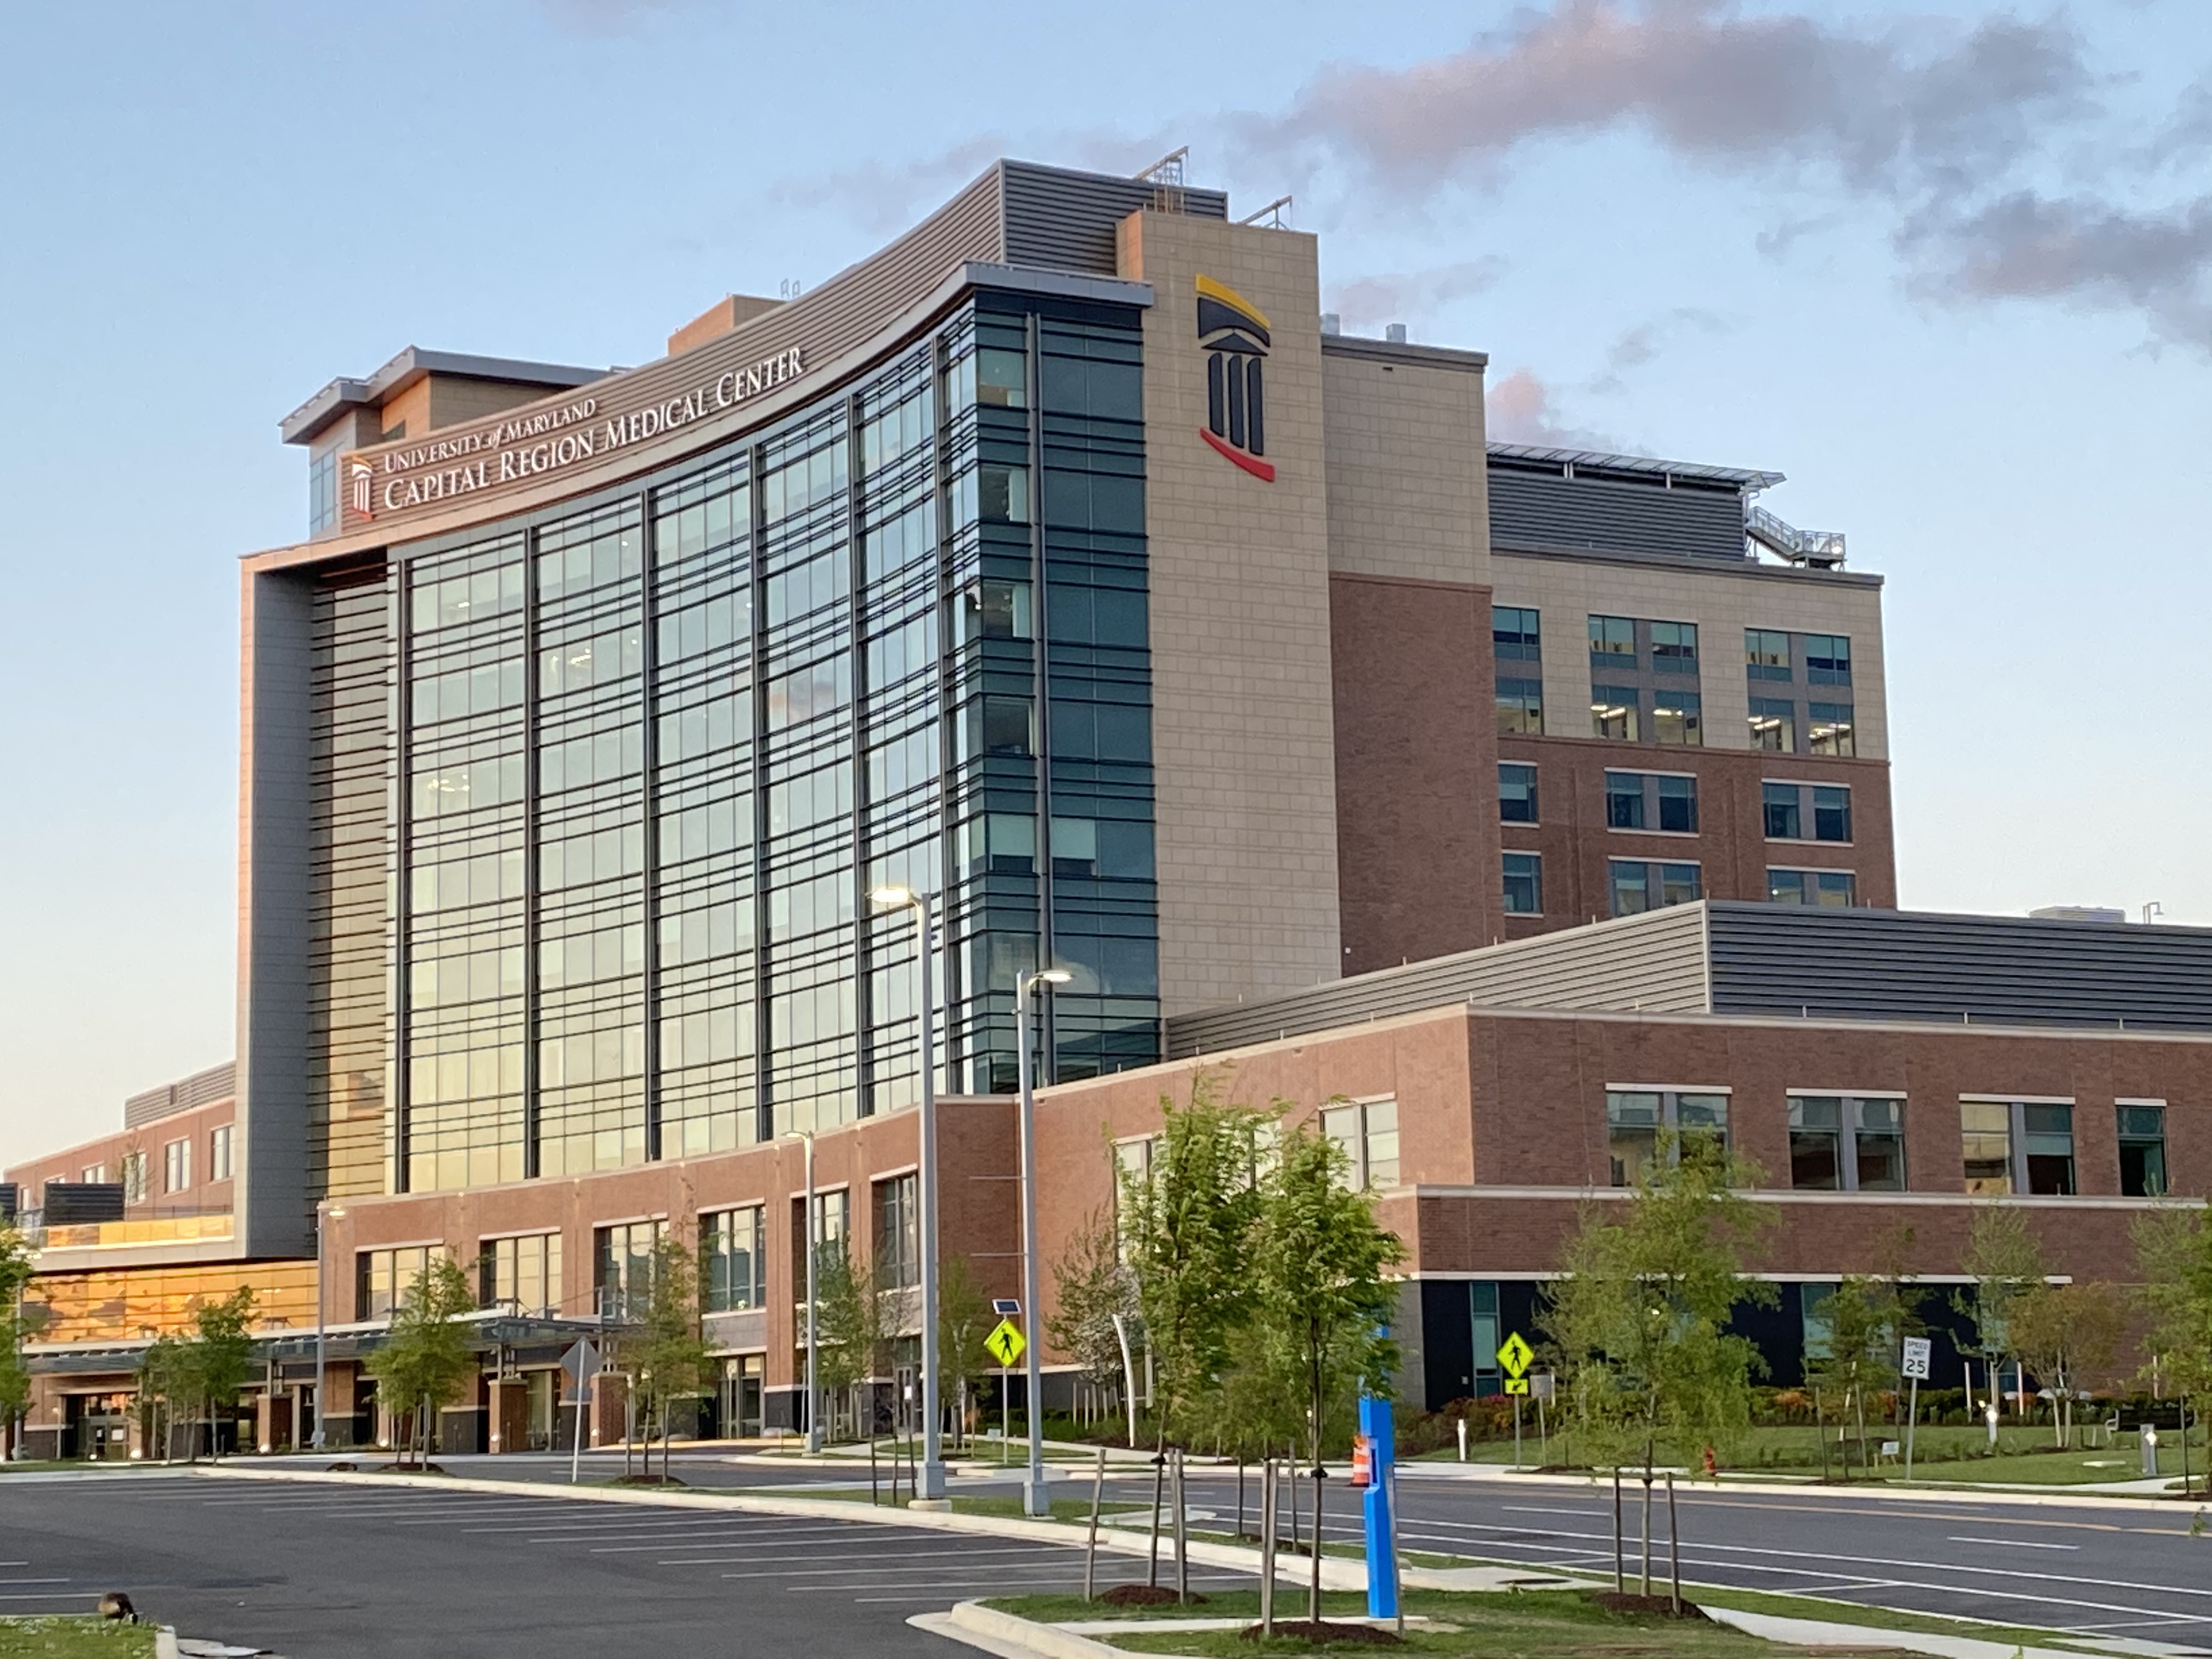 Umms Photos And Facts University Of Maryland Medical System